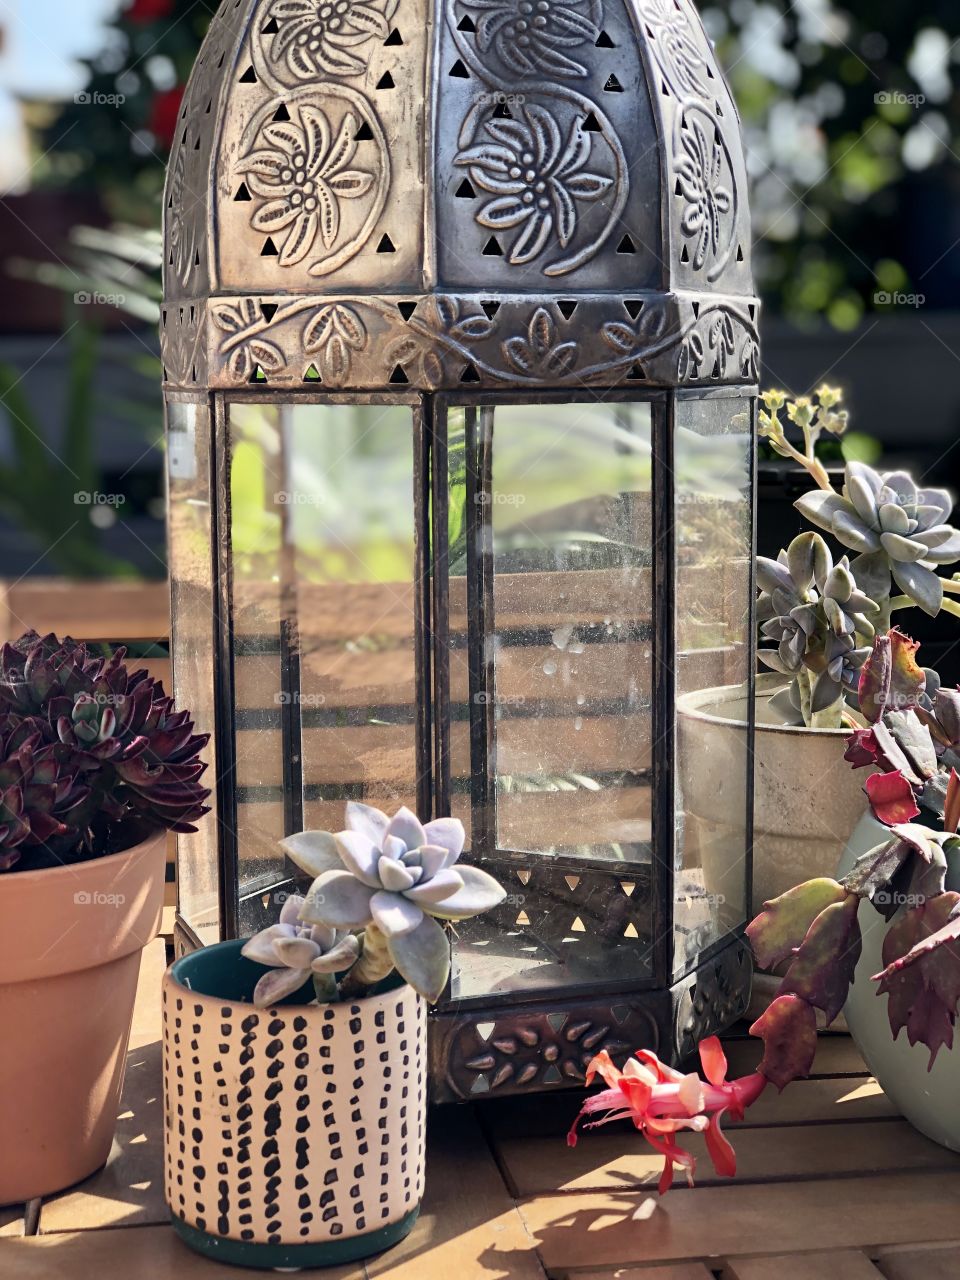 An Indian lantern surrounded by succulents